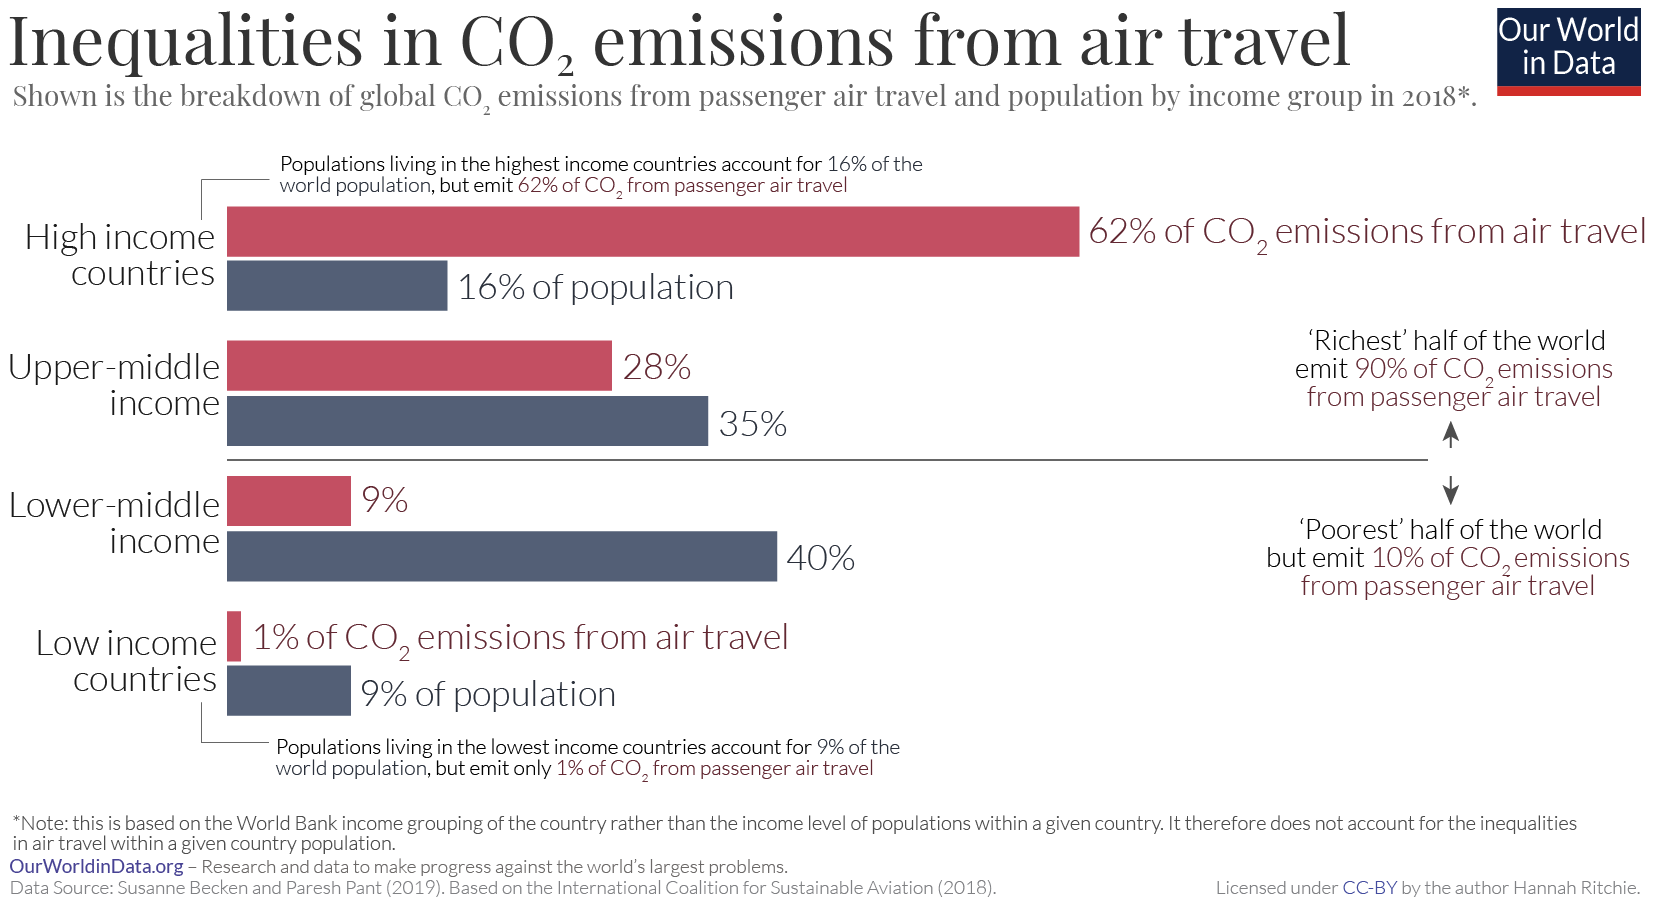 ../../_images/ourworldindata__Inequalities-in-CO2-emissions-from-air-travel.png